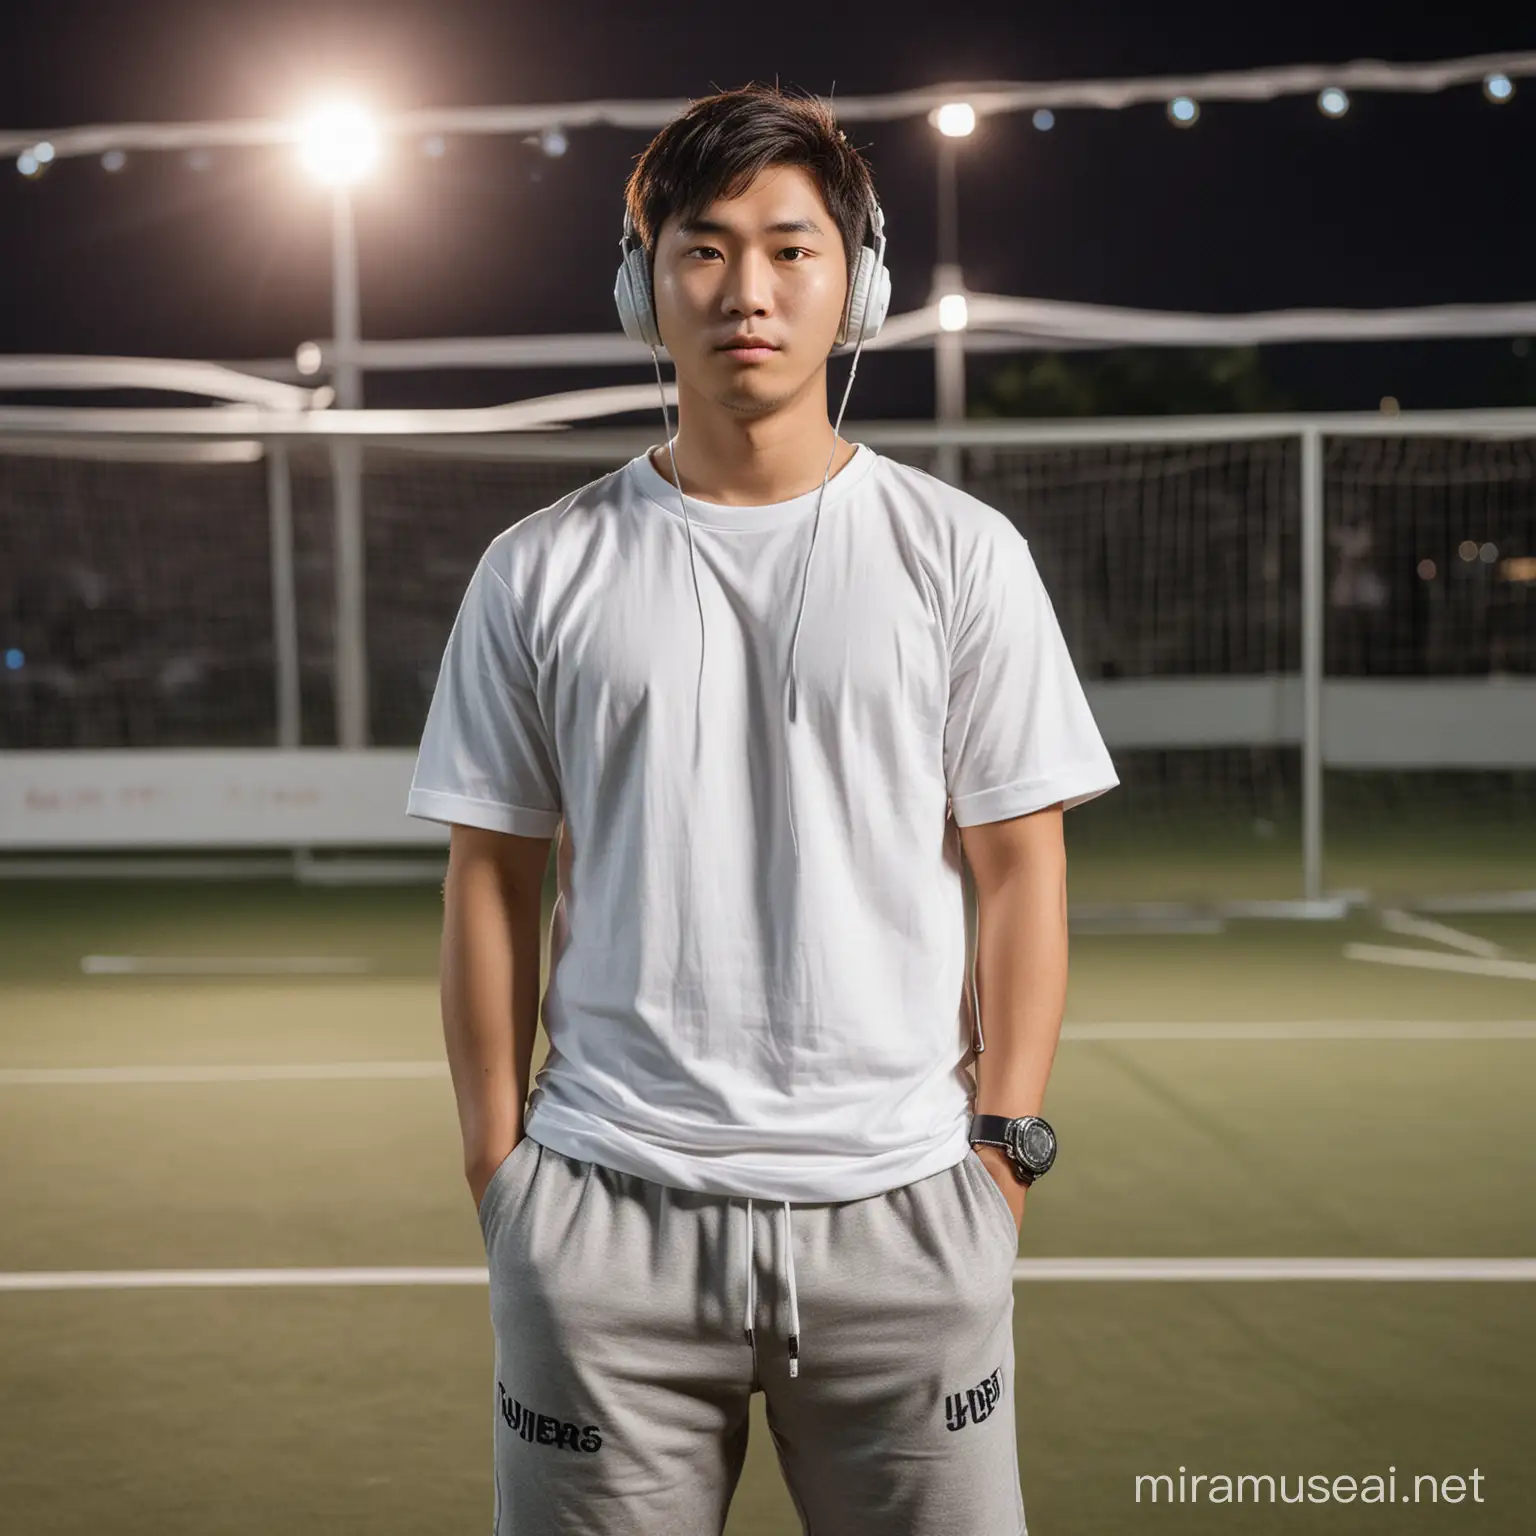 Young Korean Skateboarder at Night Urban Portrait with Futsal Field Background